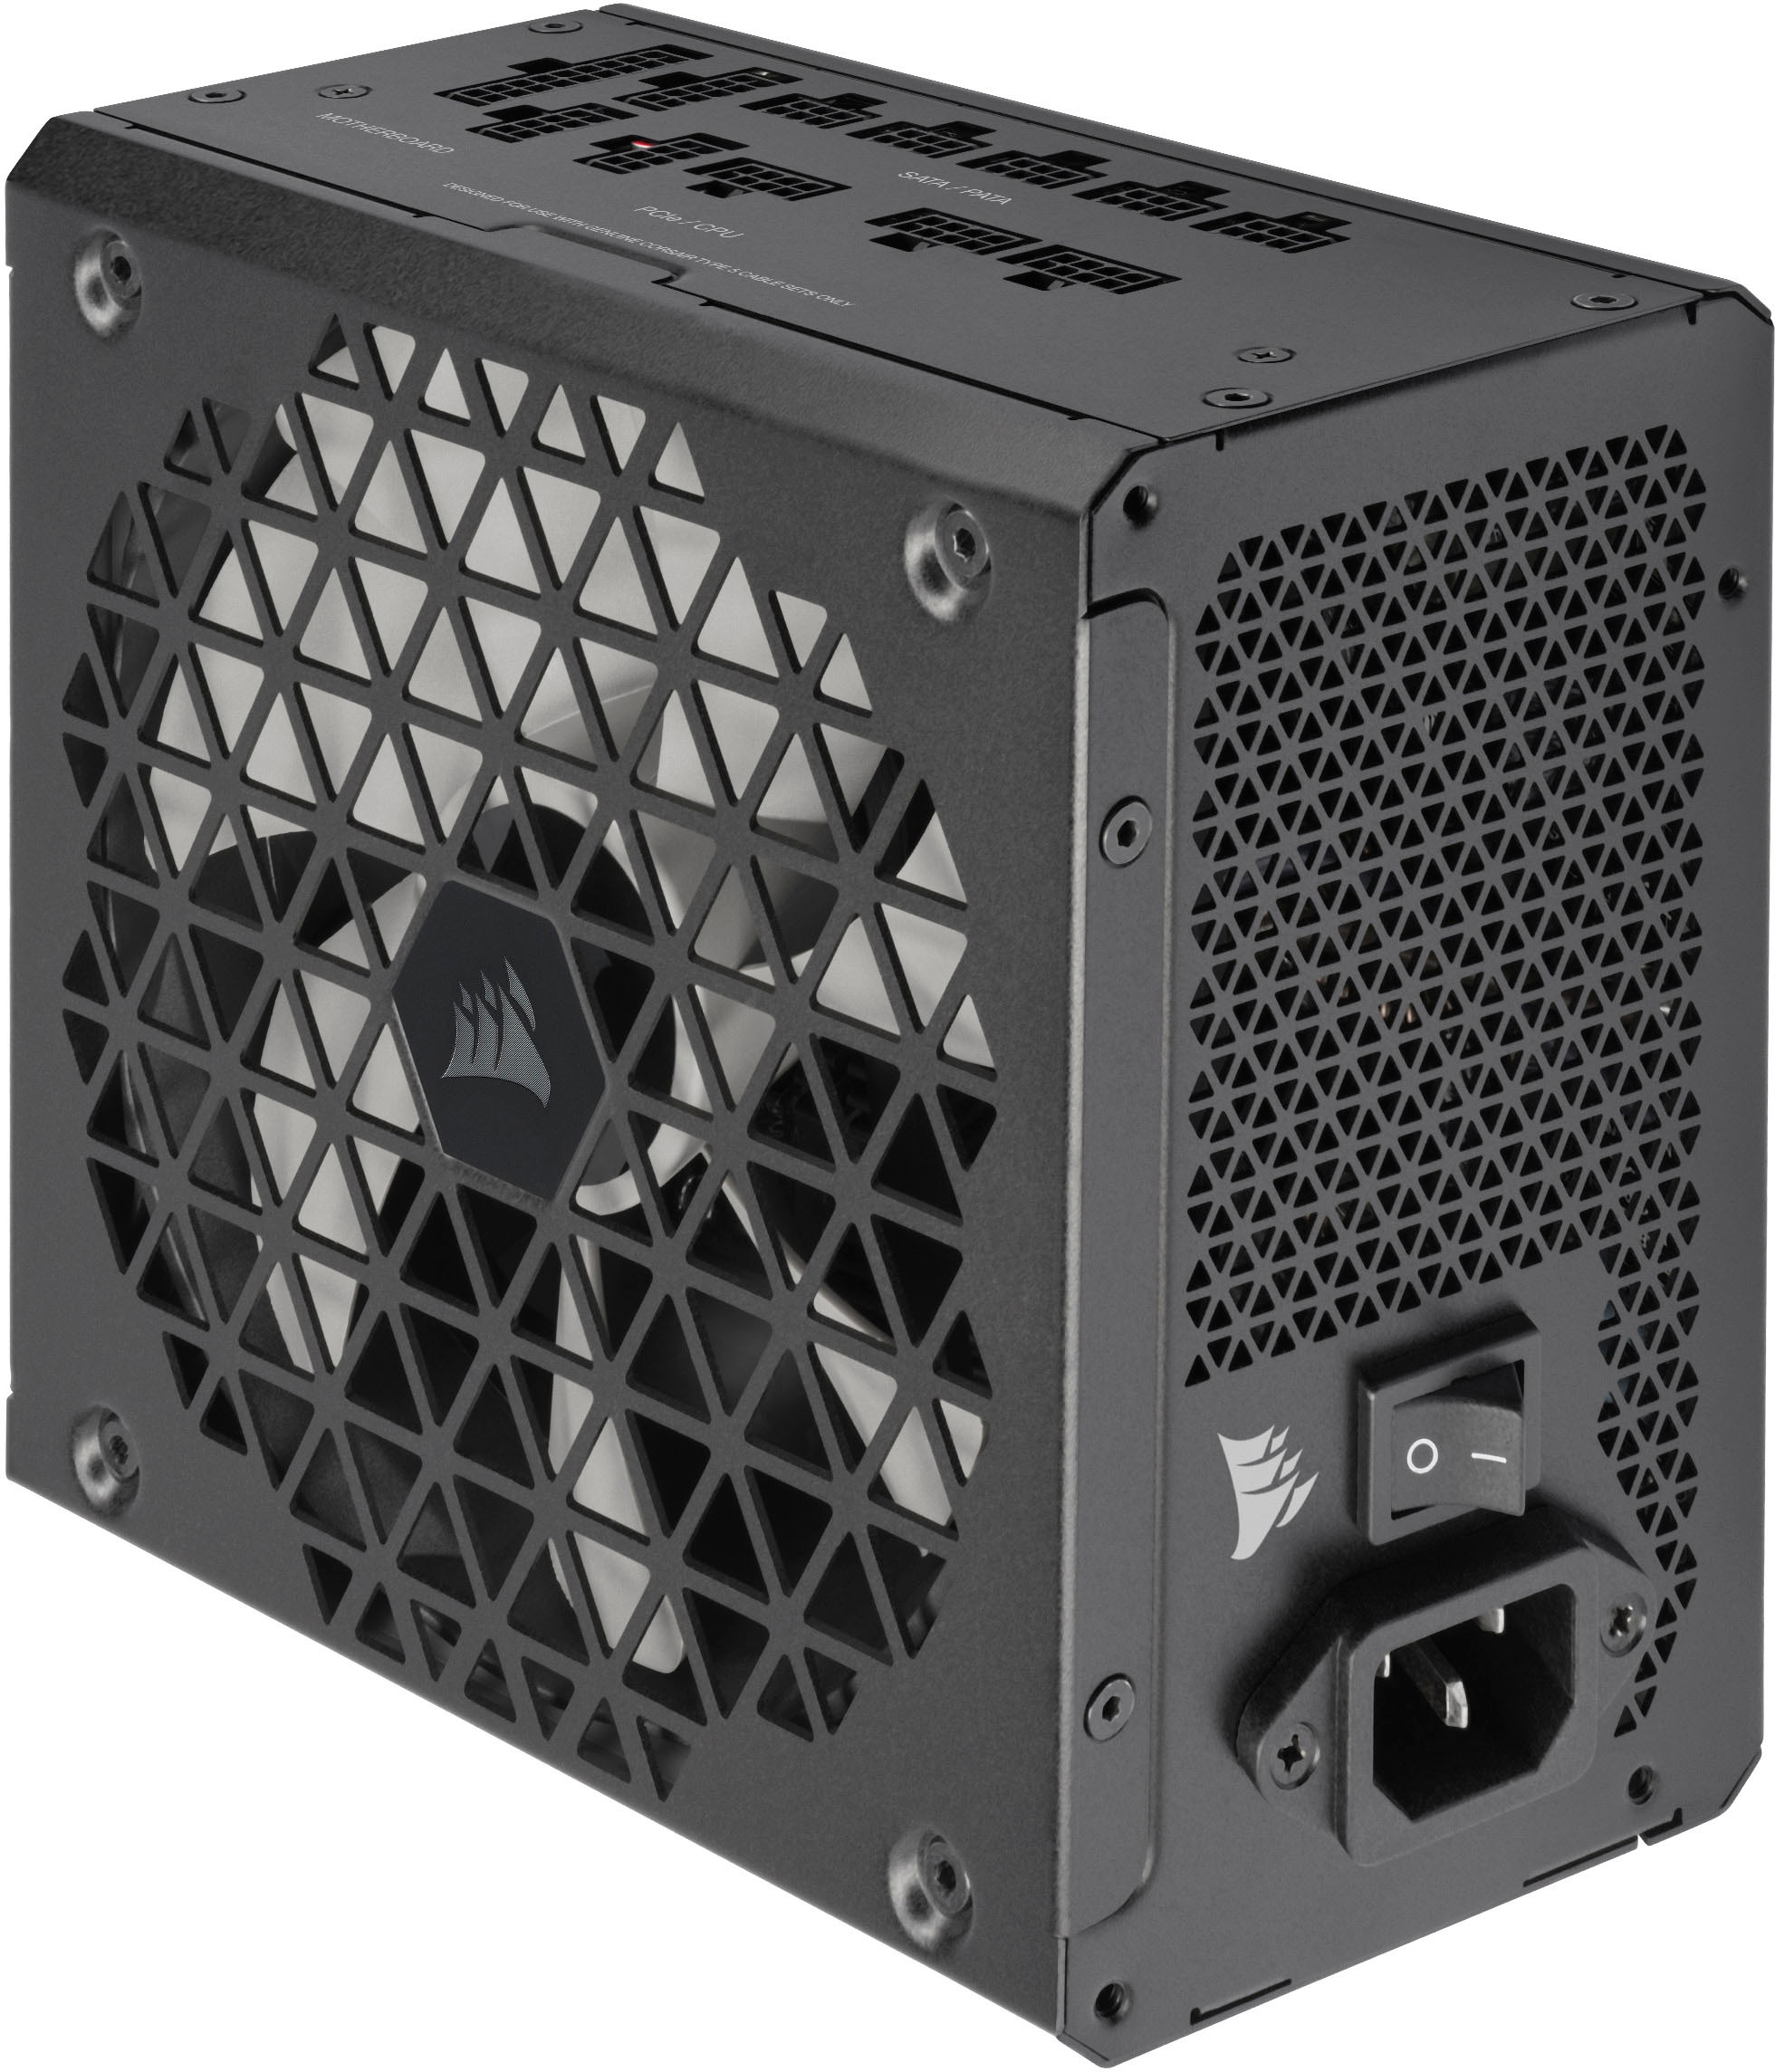 CORSAIR RMx Shift Series RM850x 80 Plus Gold Fully Modular ATX Power Supply  with Modular Side Interface Black CP-9020252-NA - Best Buy